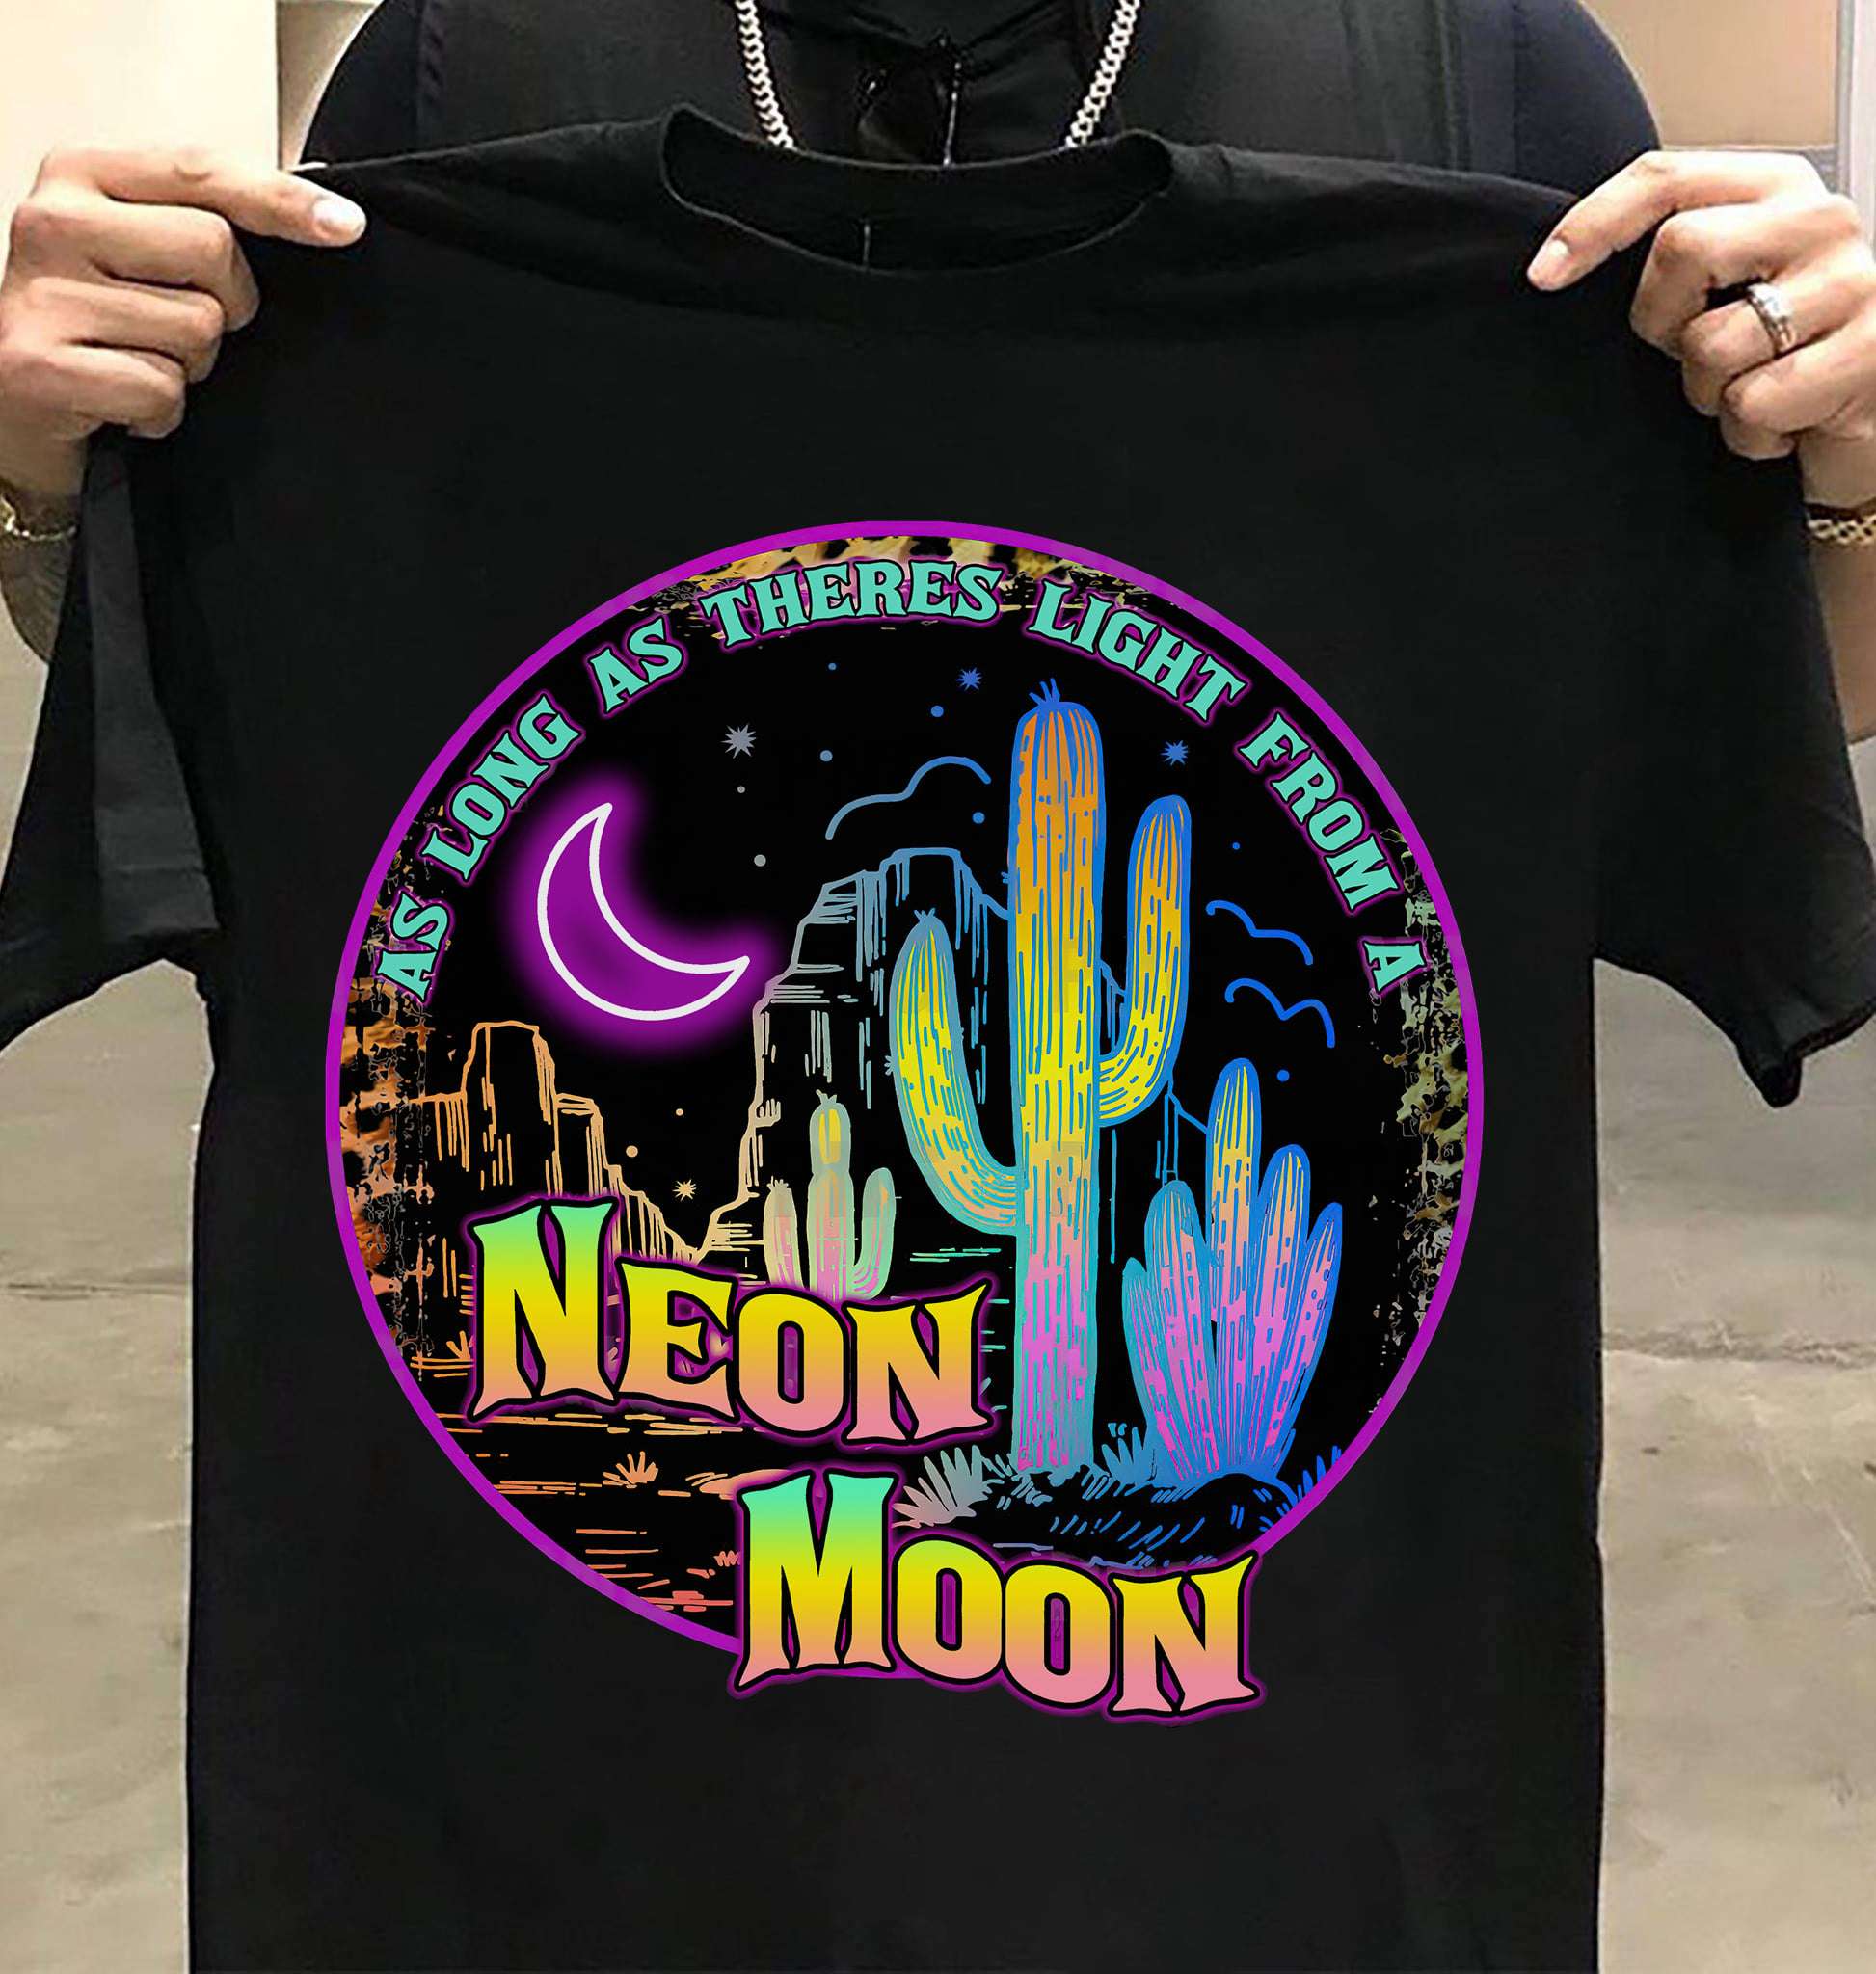 Neon Land, Neon Moon - As long as theres light from a neon moon